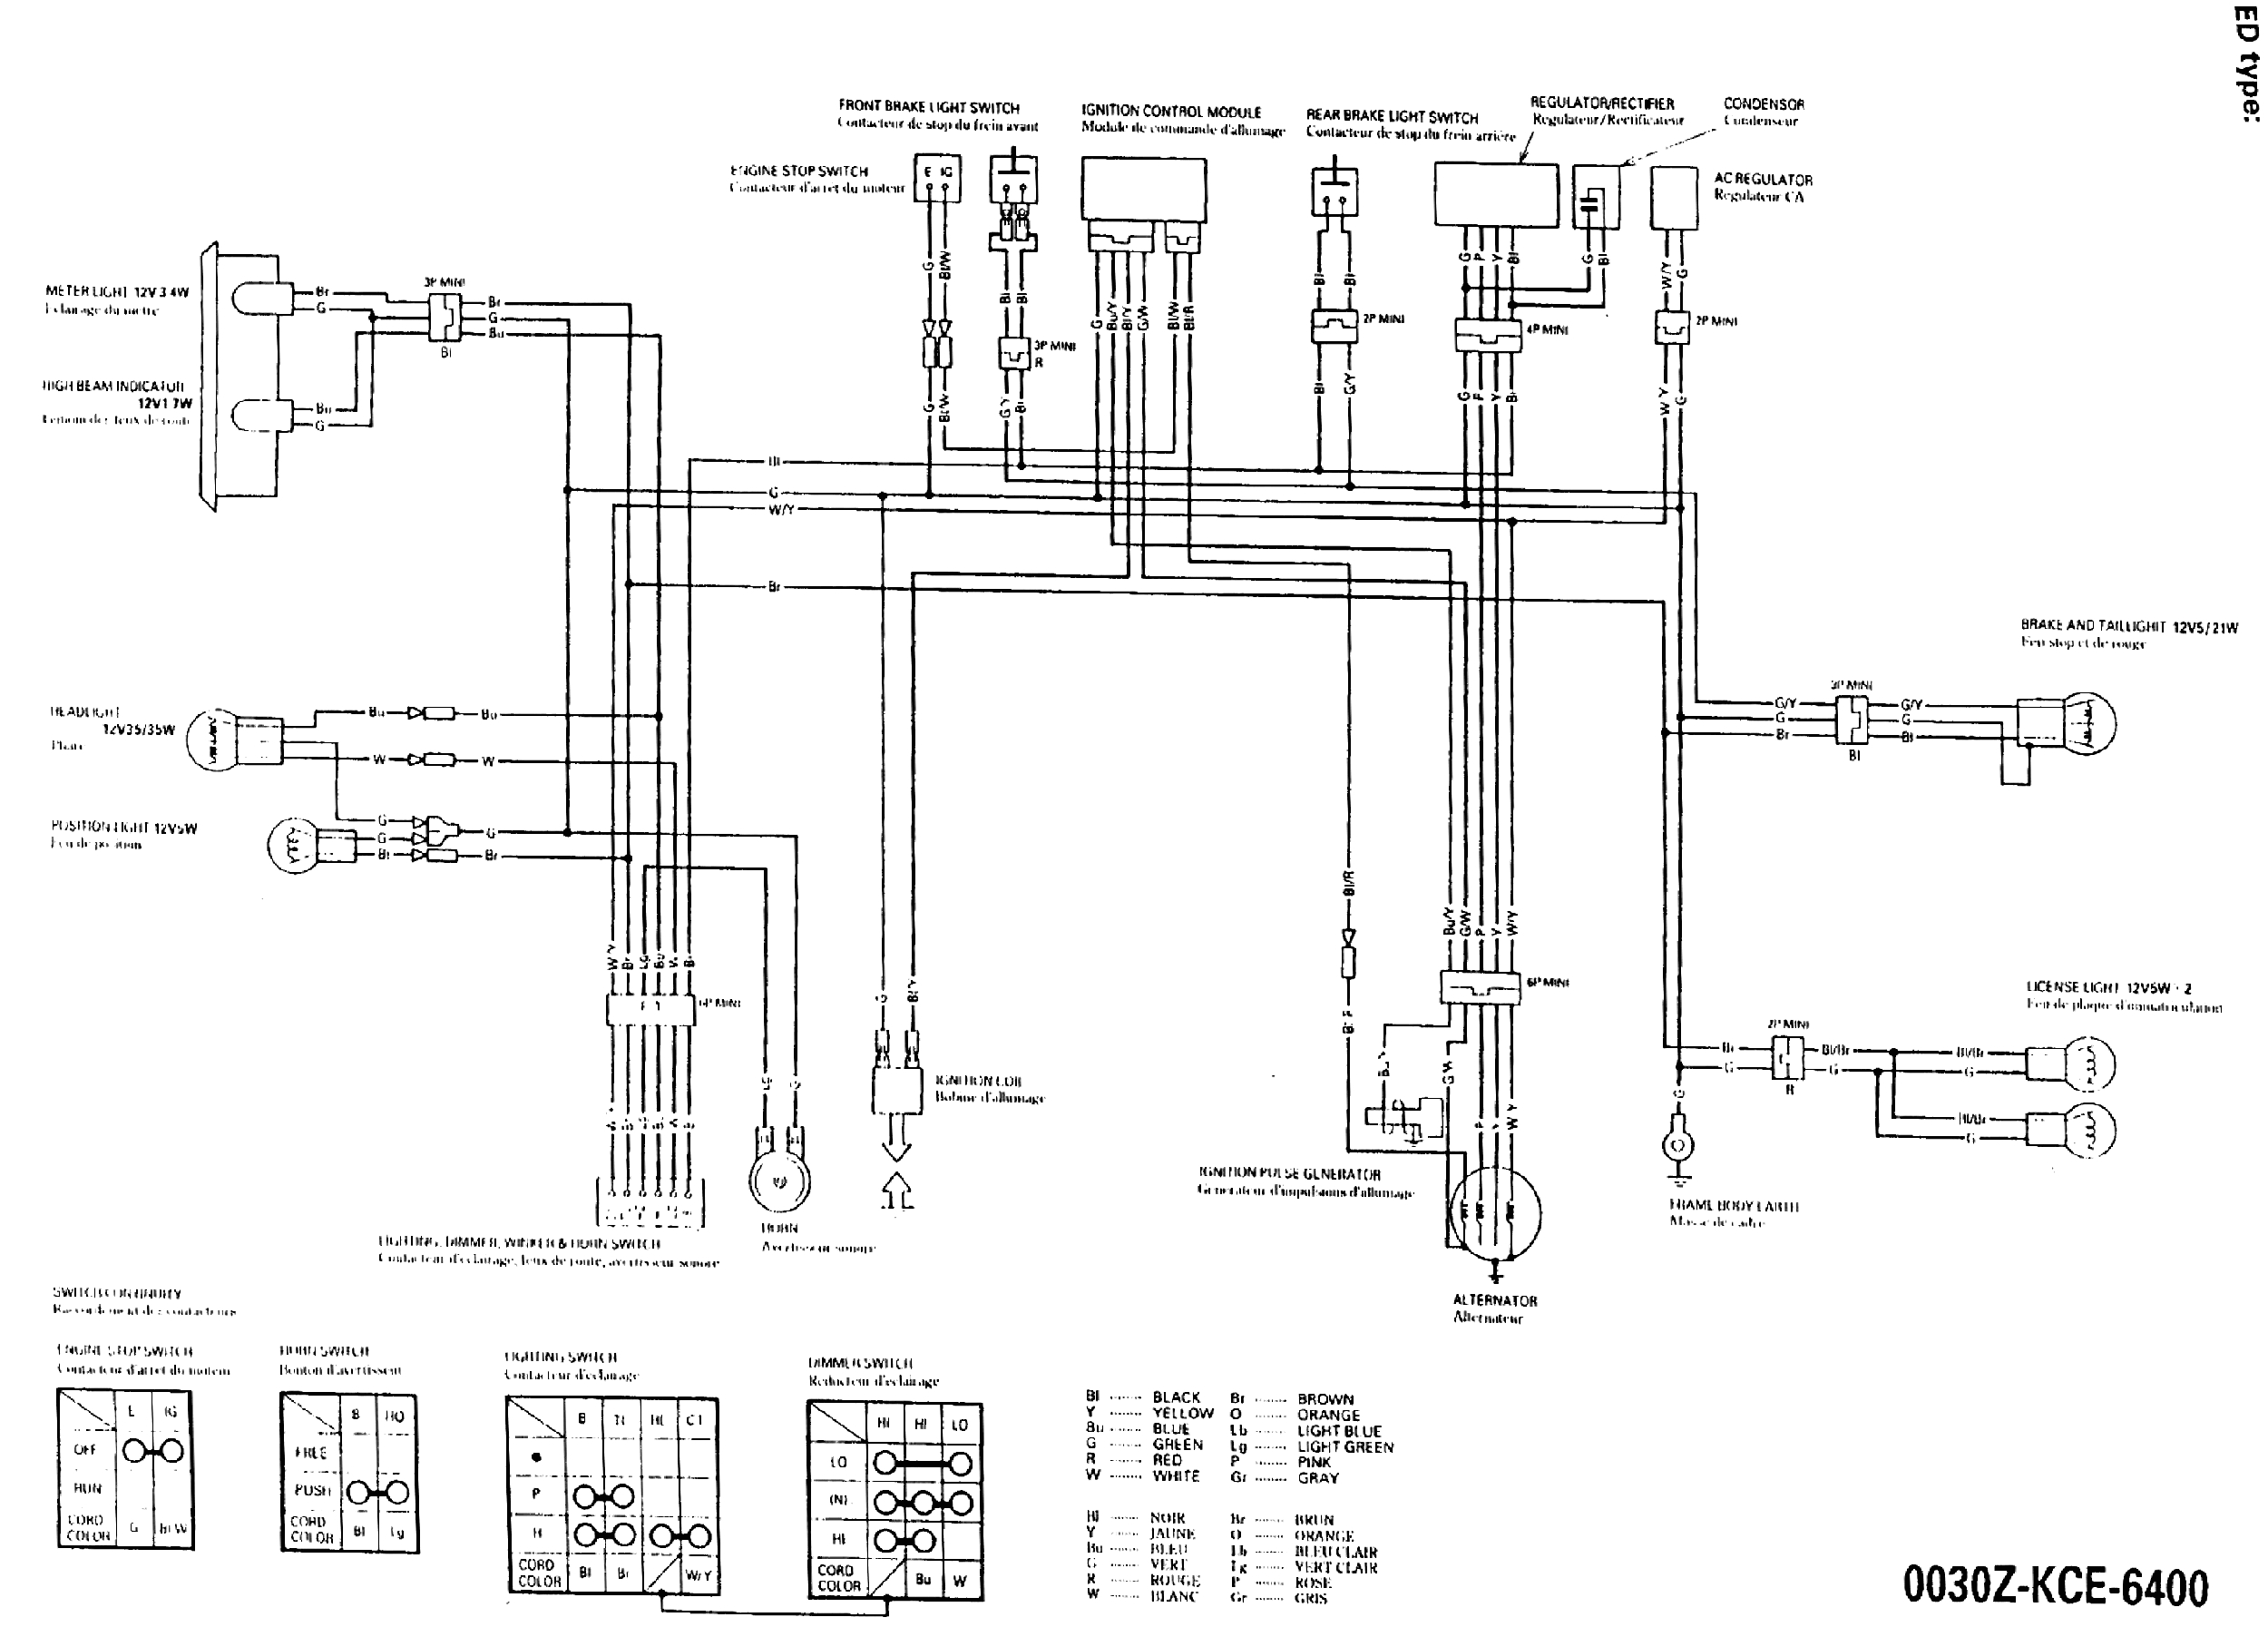 Honda Xl 250 Wiring Diagram Honda Xl 250 Wiring Diagram Wiring Library